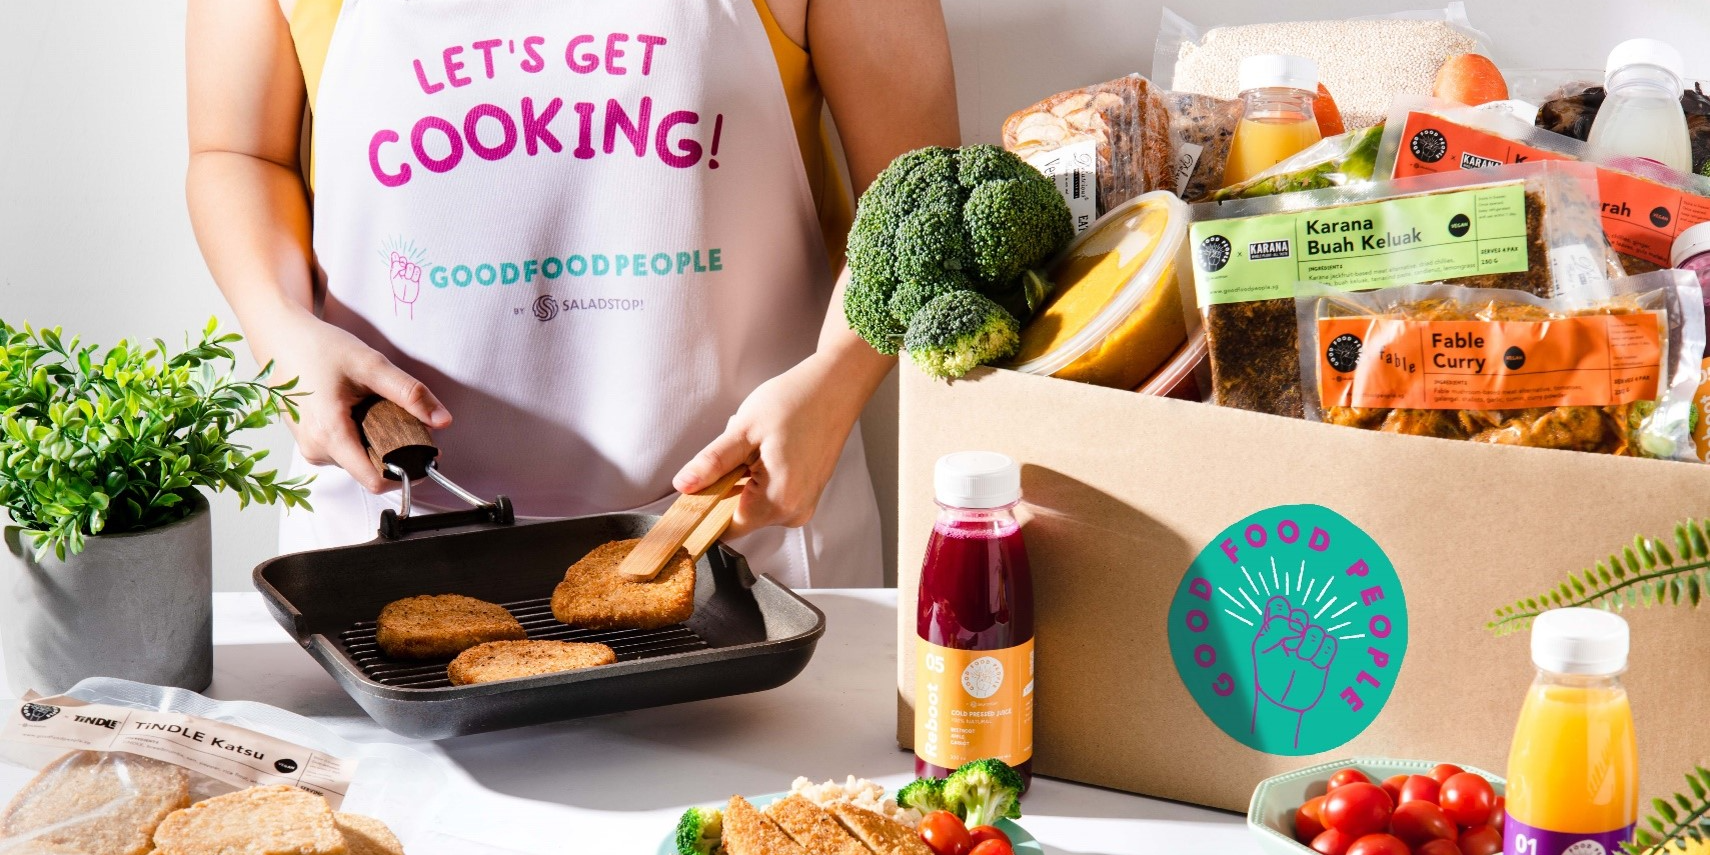 Enjoy up to 20% off special bundles from Good Food People on Deliveroo